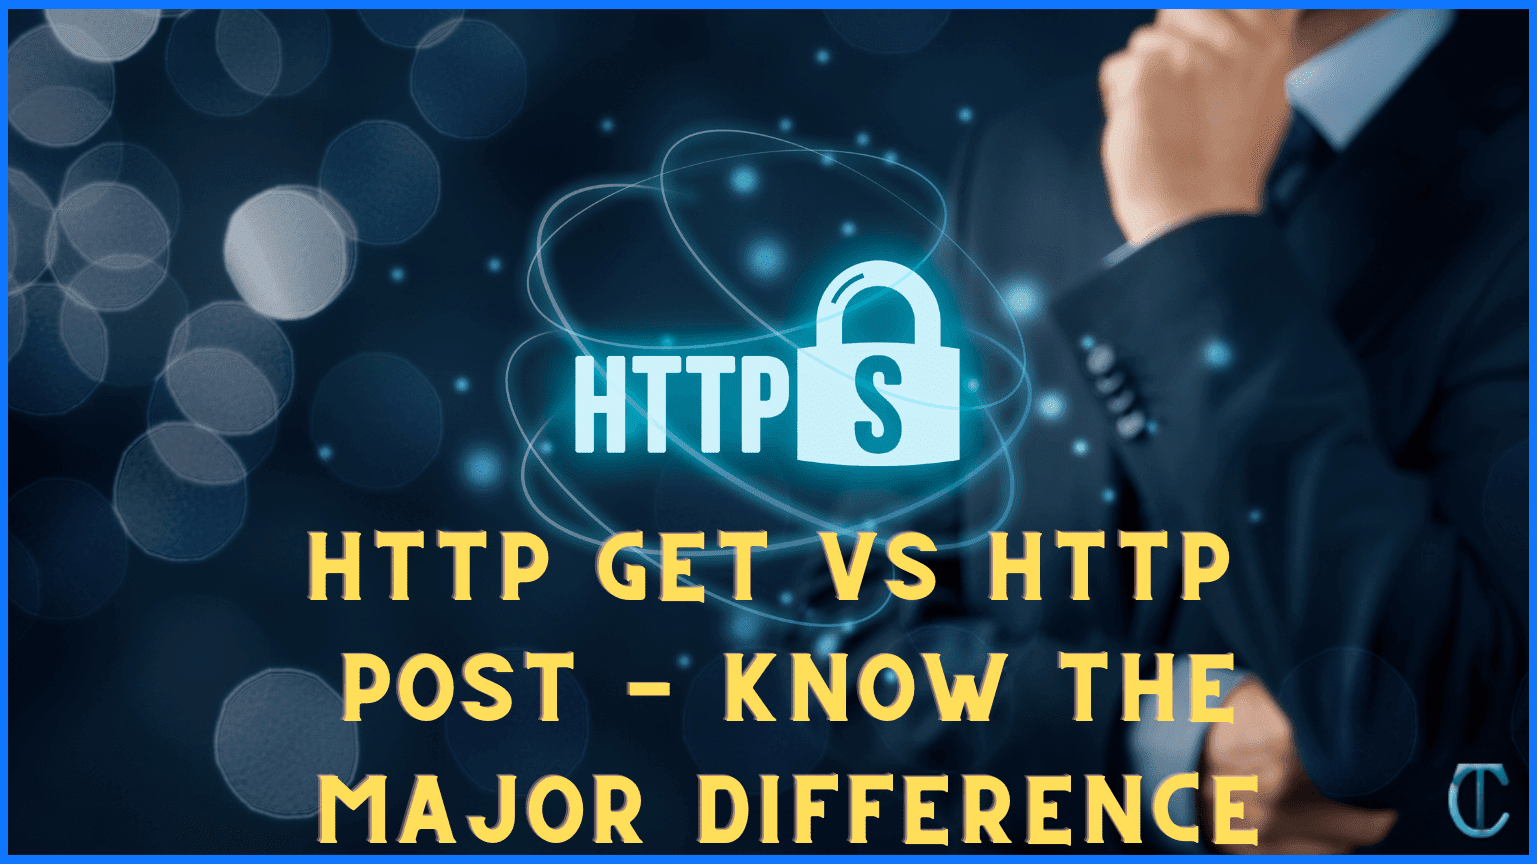 HTTP GET vs HTTP POST  know the major Difference